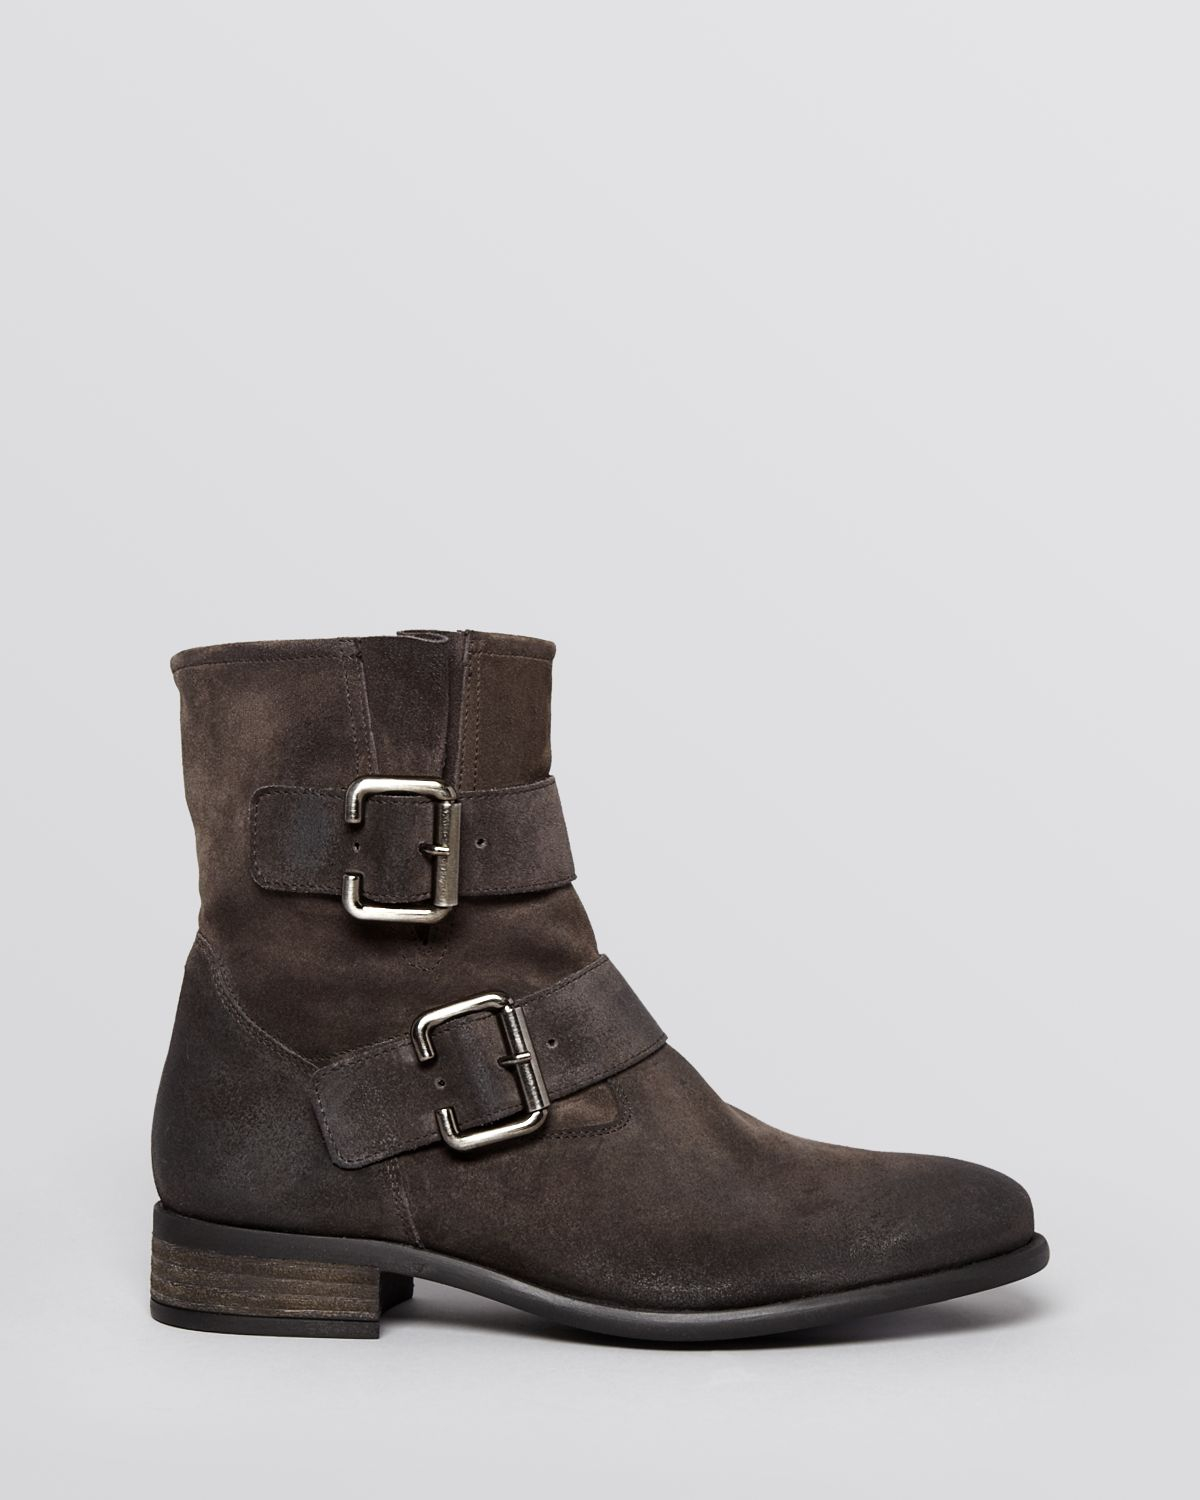 Lyst - Paul green Boots - Carrie With Buckle in Gray